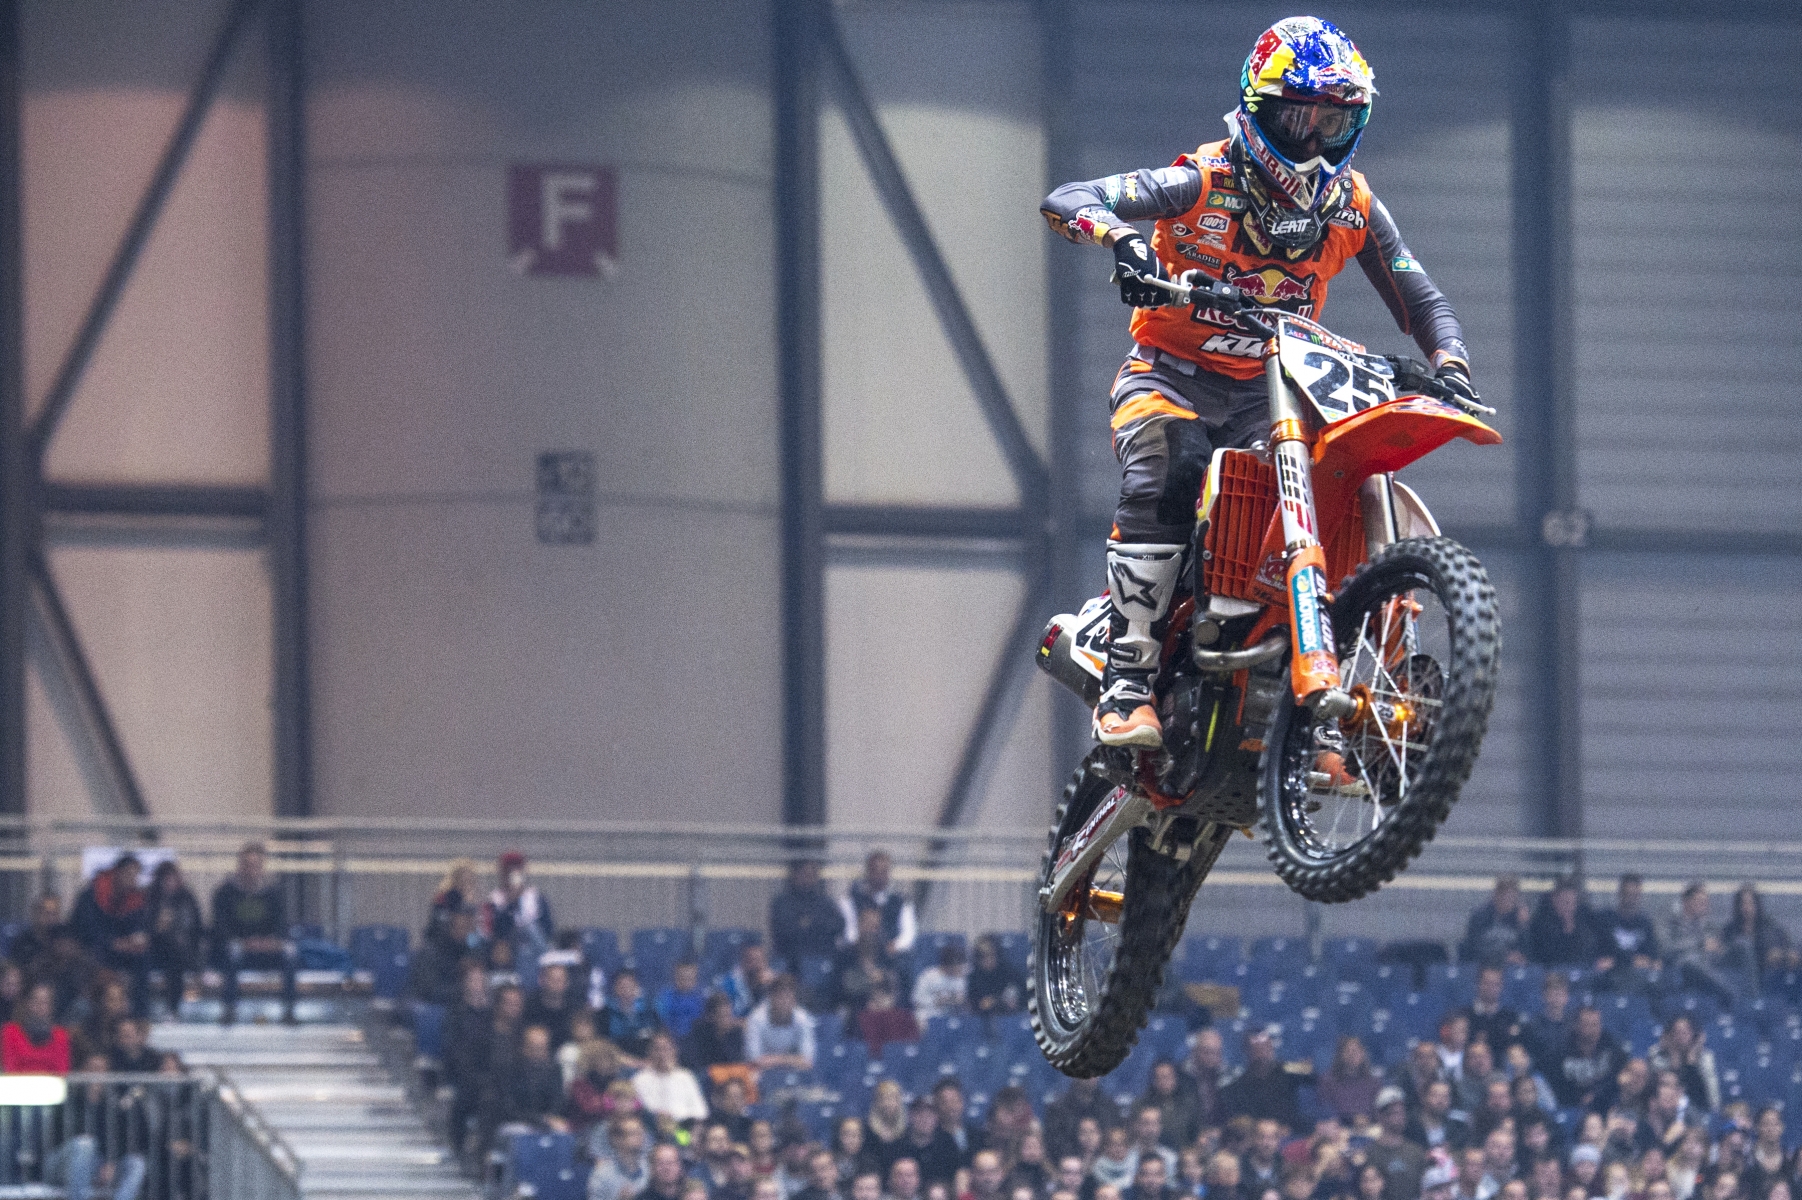 French pilot Marvin Musquin in action, during the 31th Geneva International Supercross at the Palexpo, in Geneva, Switzerland, Friday, December 2, 2016. (KEYSTONE/Leo Duperrex)